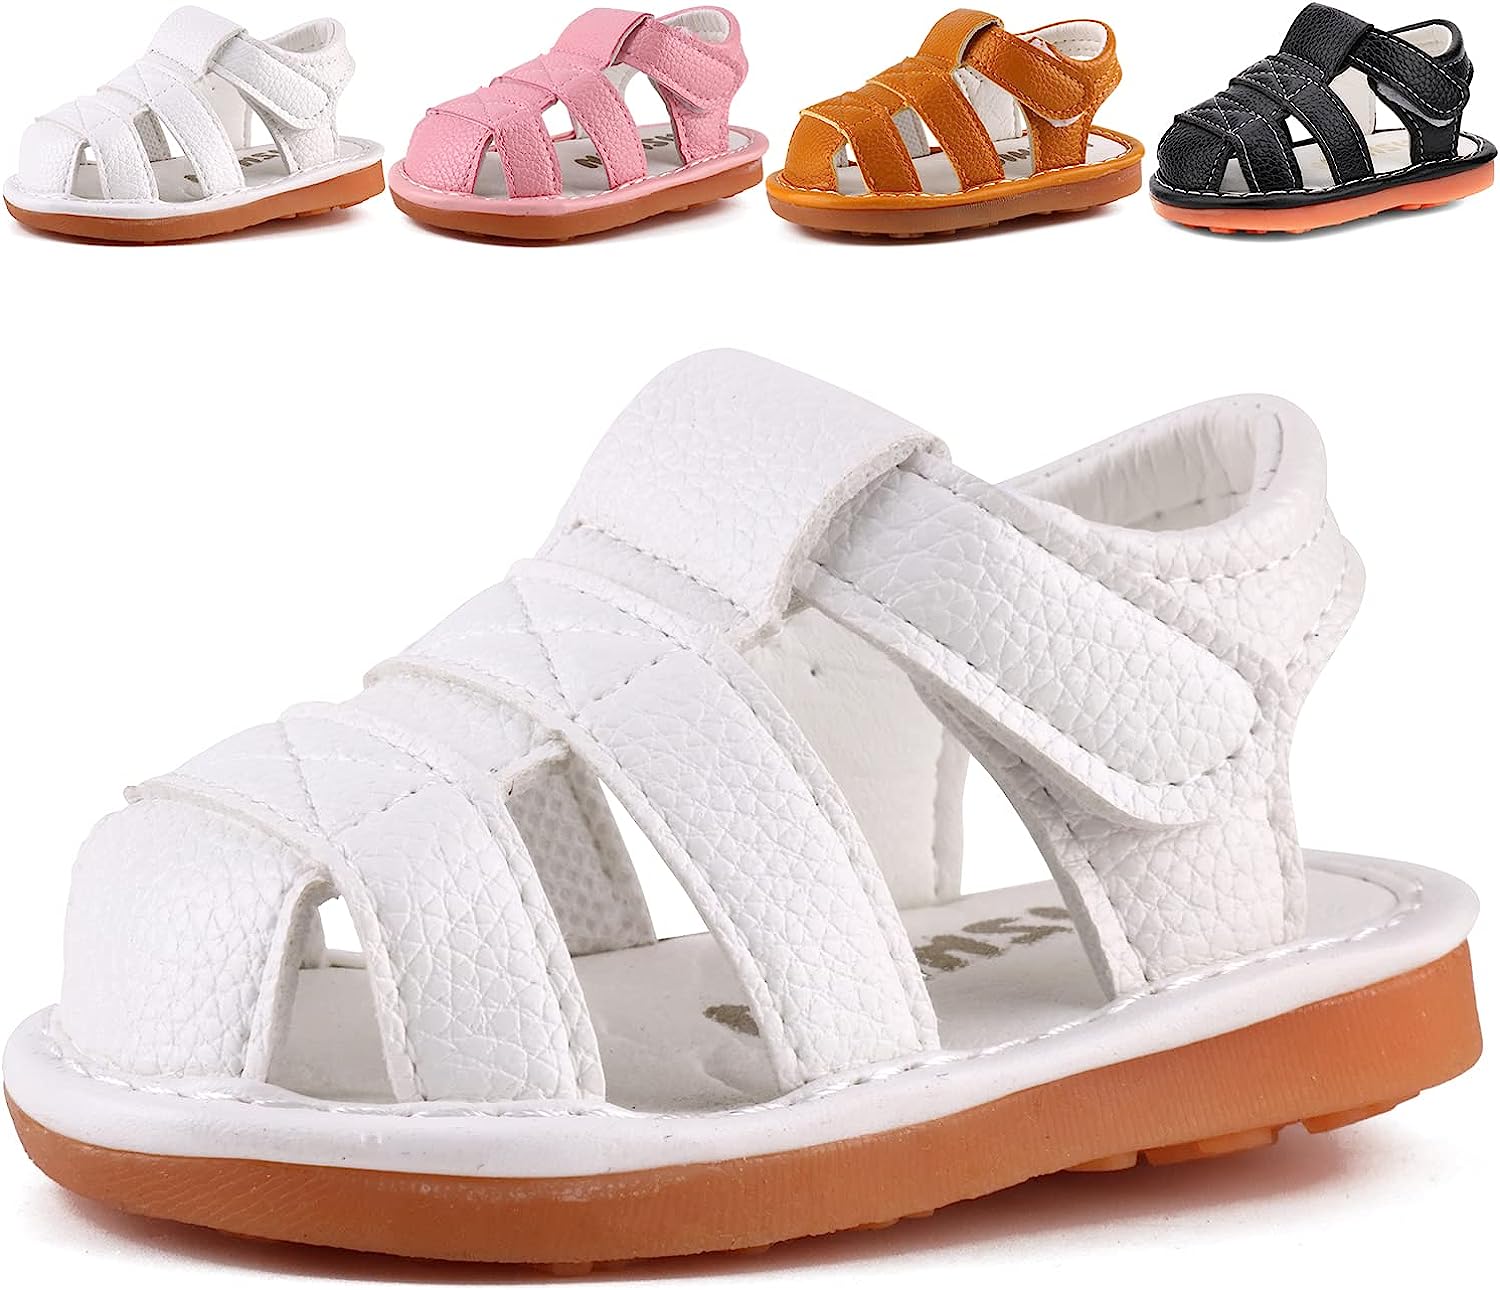 CINDEAR Boys Girls Summer Squeaky Sandals Closed-Toe [...]